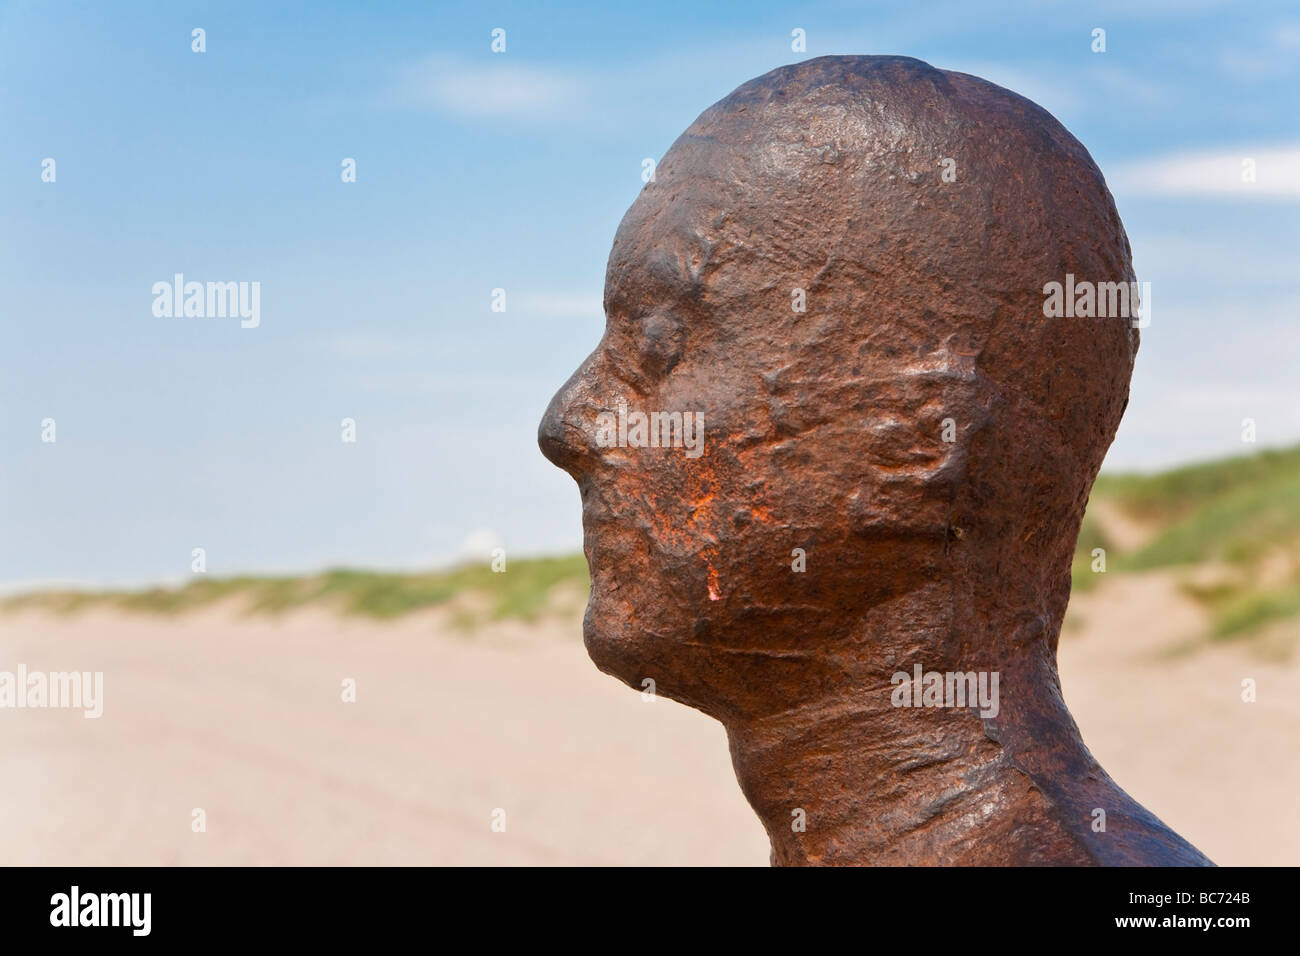 One of Antony Gormley's 'Another place' iron man statues. Crosby Beach, Liverpool, Merseyside, United Kingdom. Stock Photo